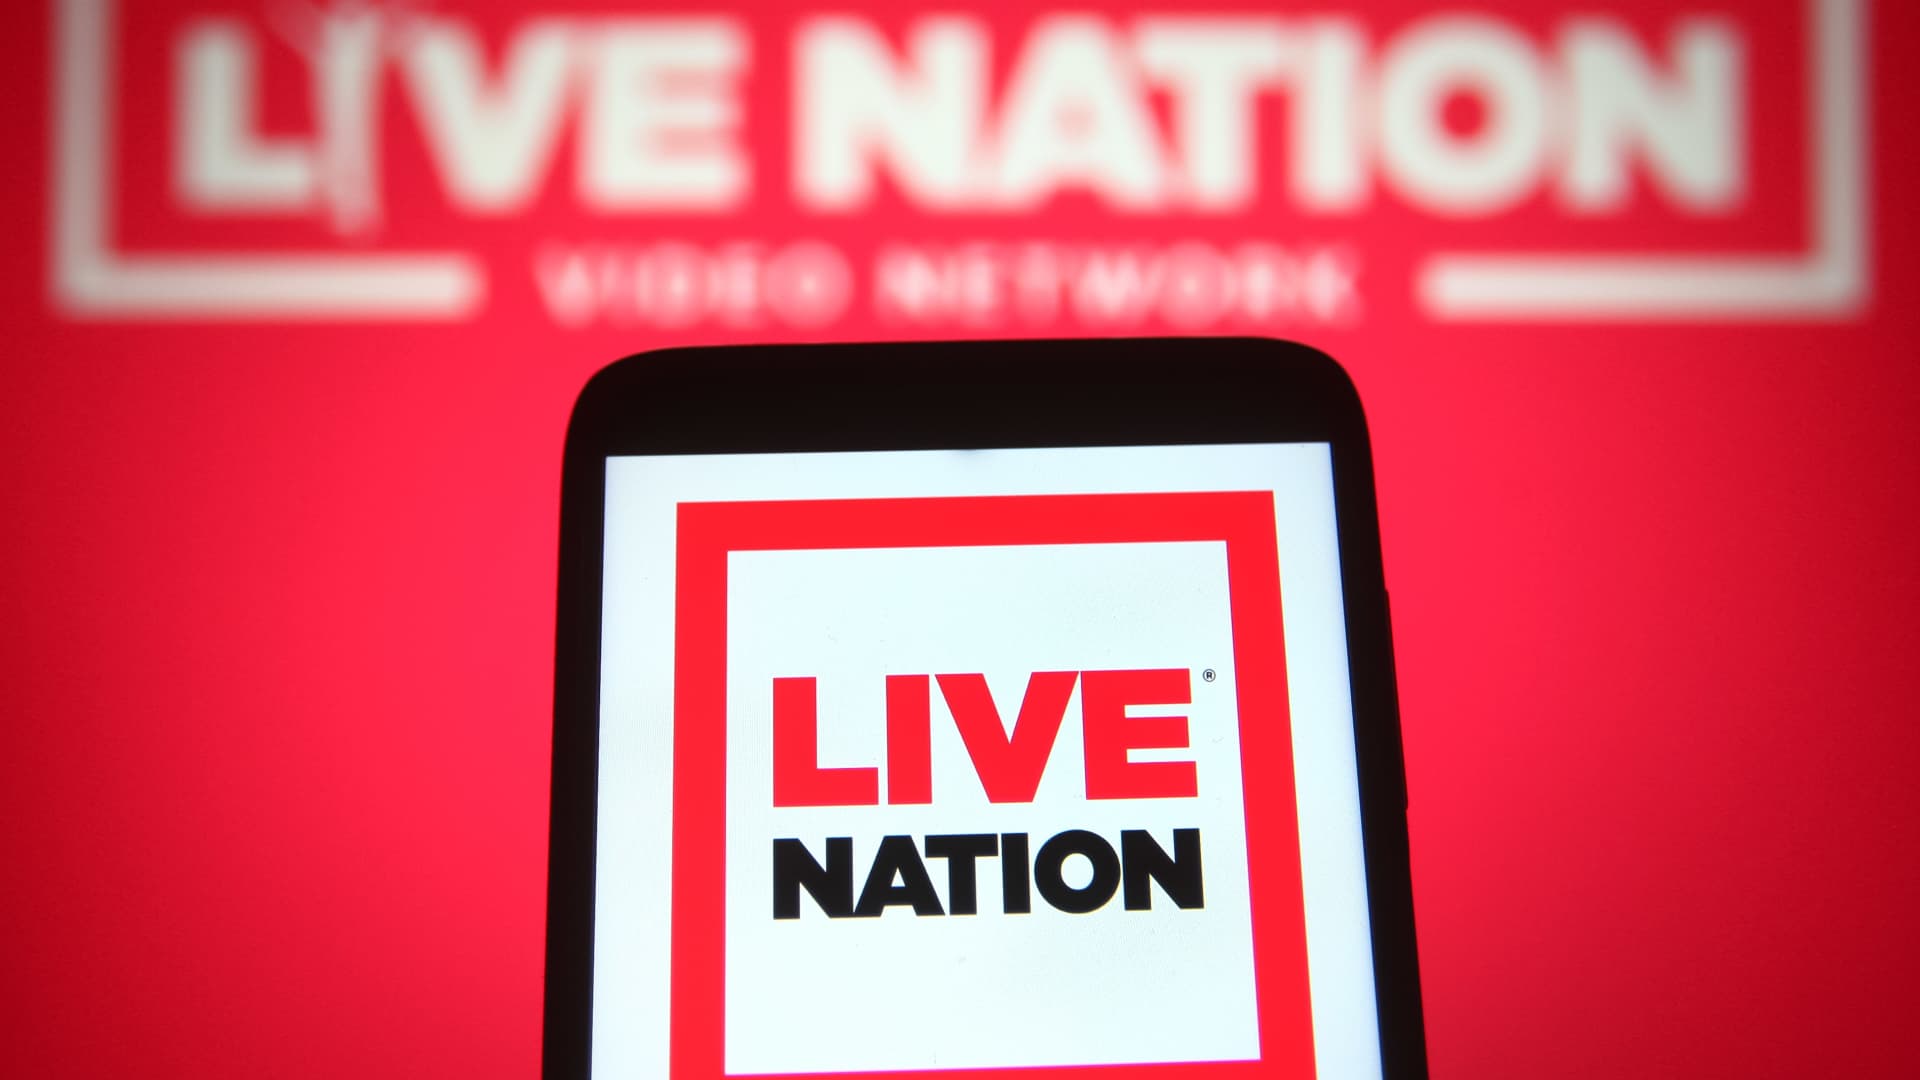 An illustration of a Live Nation Entertainment logo is seen on a smartphone and a pc screen.